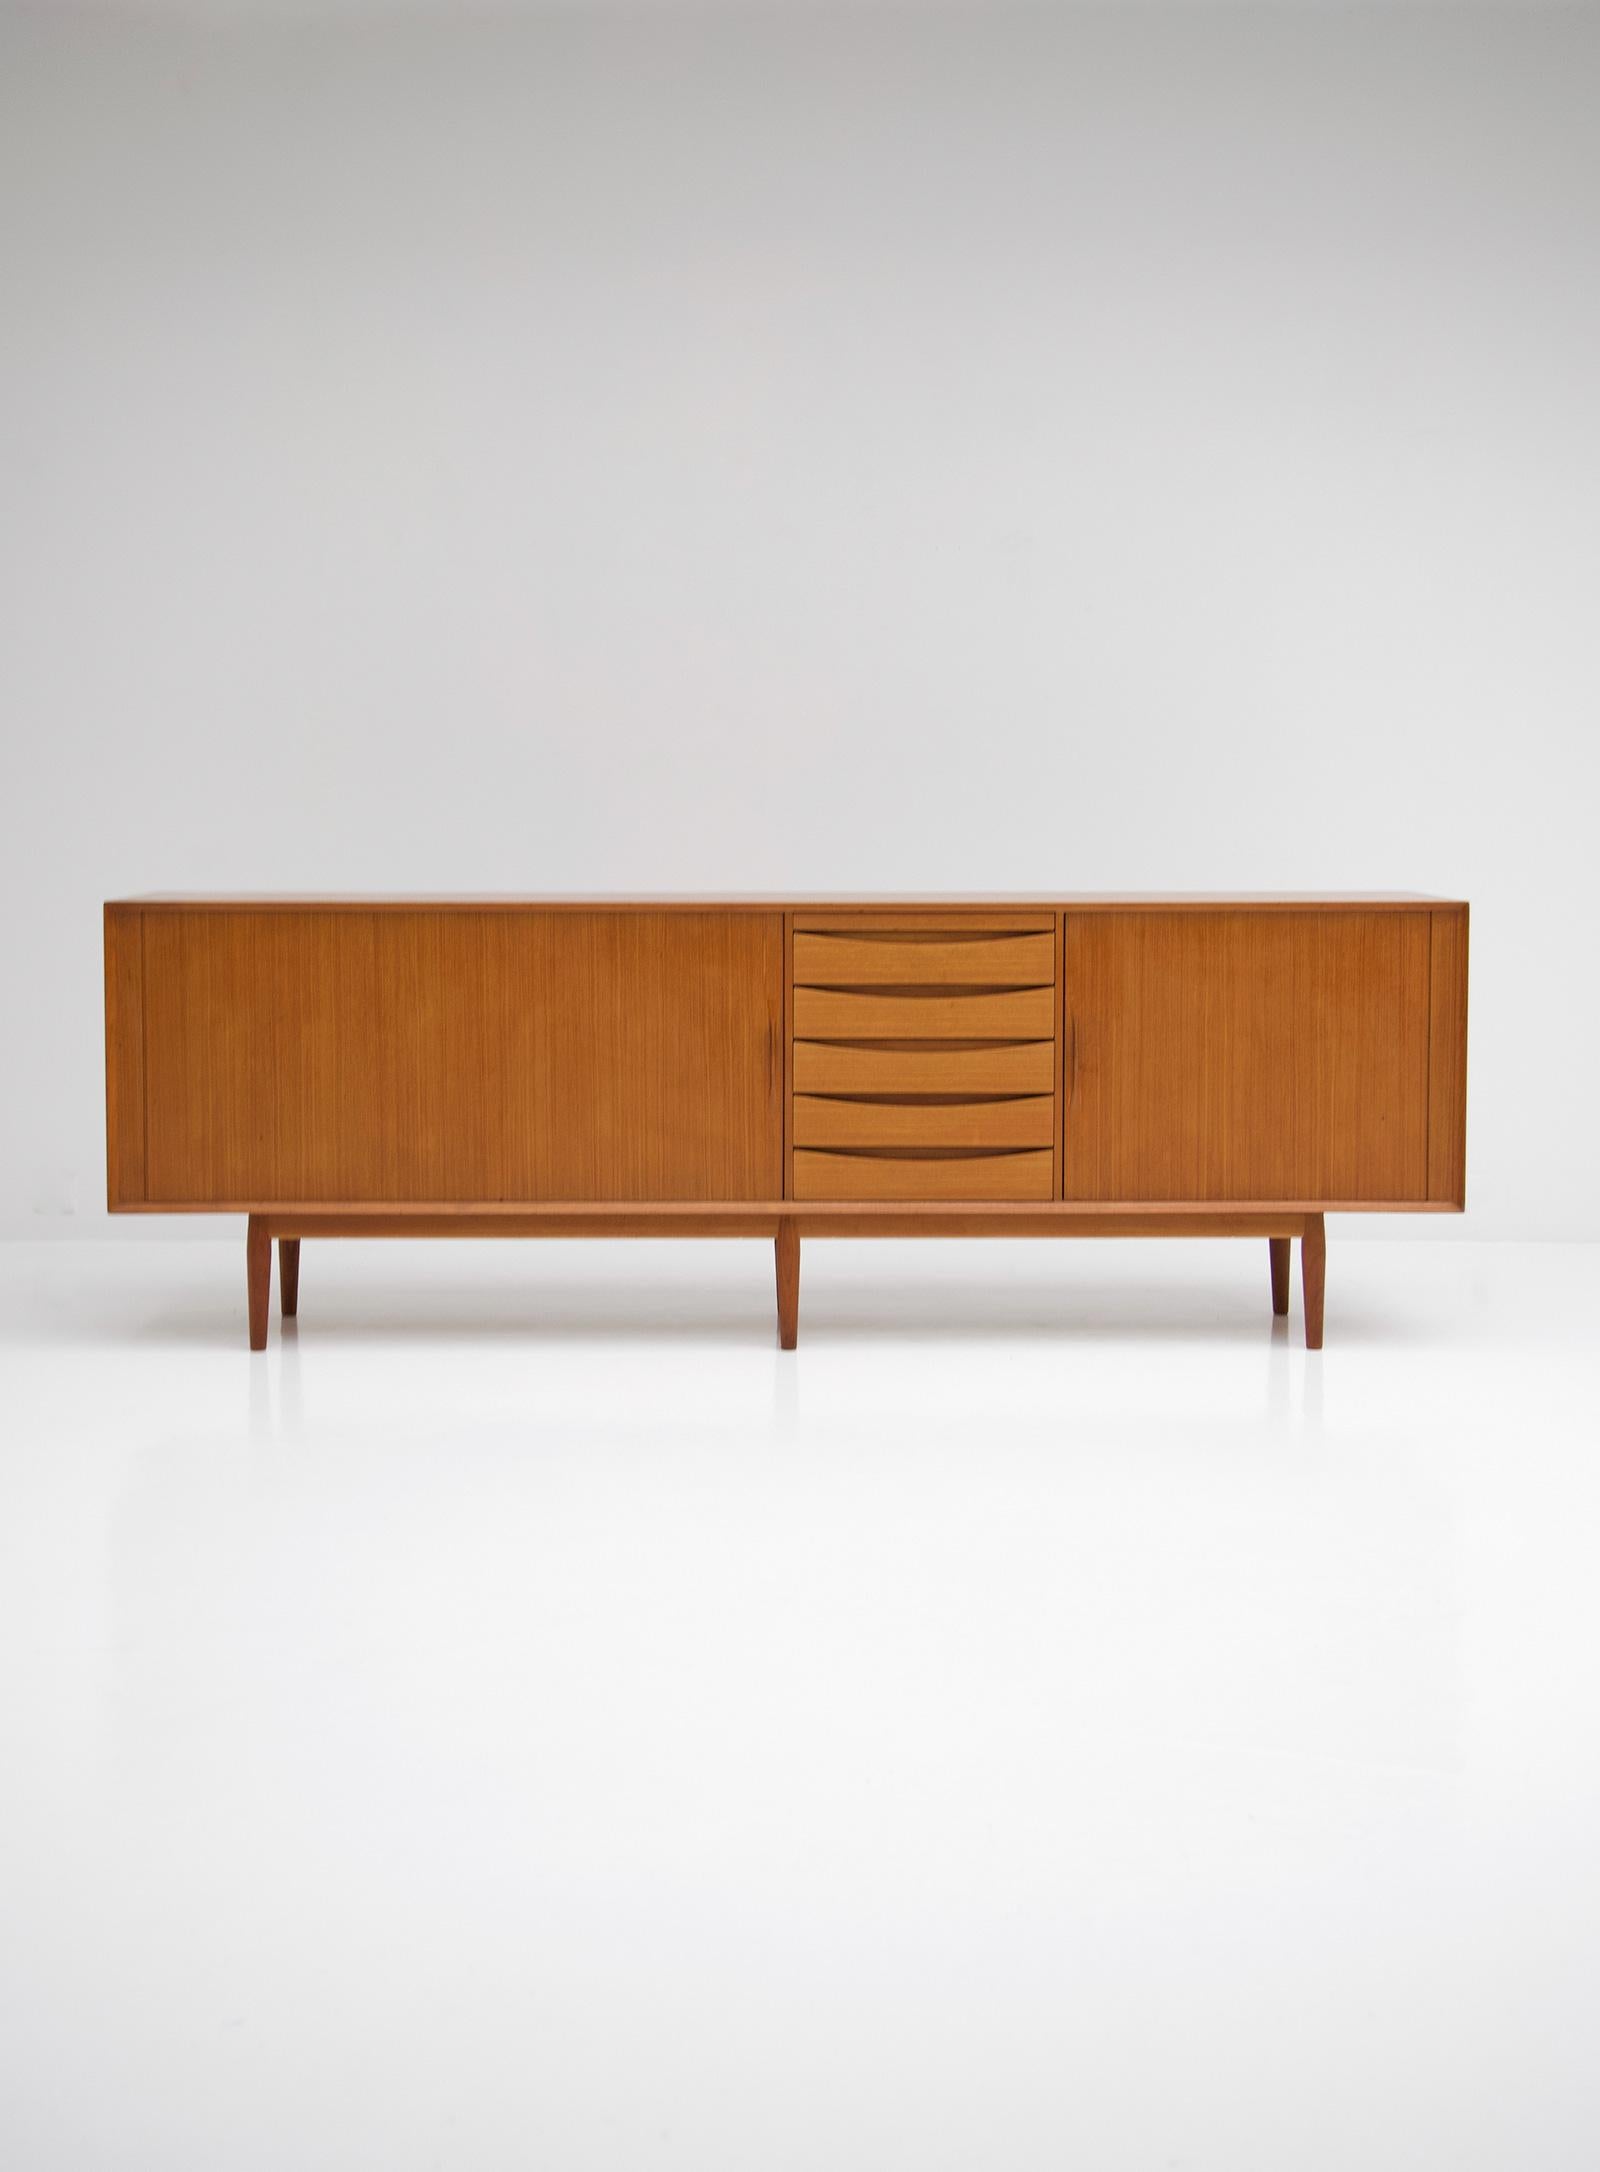 Danish modern credenza, Arne Vodder, Sibast, Denmark 1960s

The Danish architect and designer Arne Vodder was recognized as one of the most important Danish architects of the 20th century . He was especially known for his sideboards, sofas and